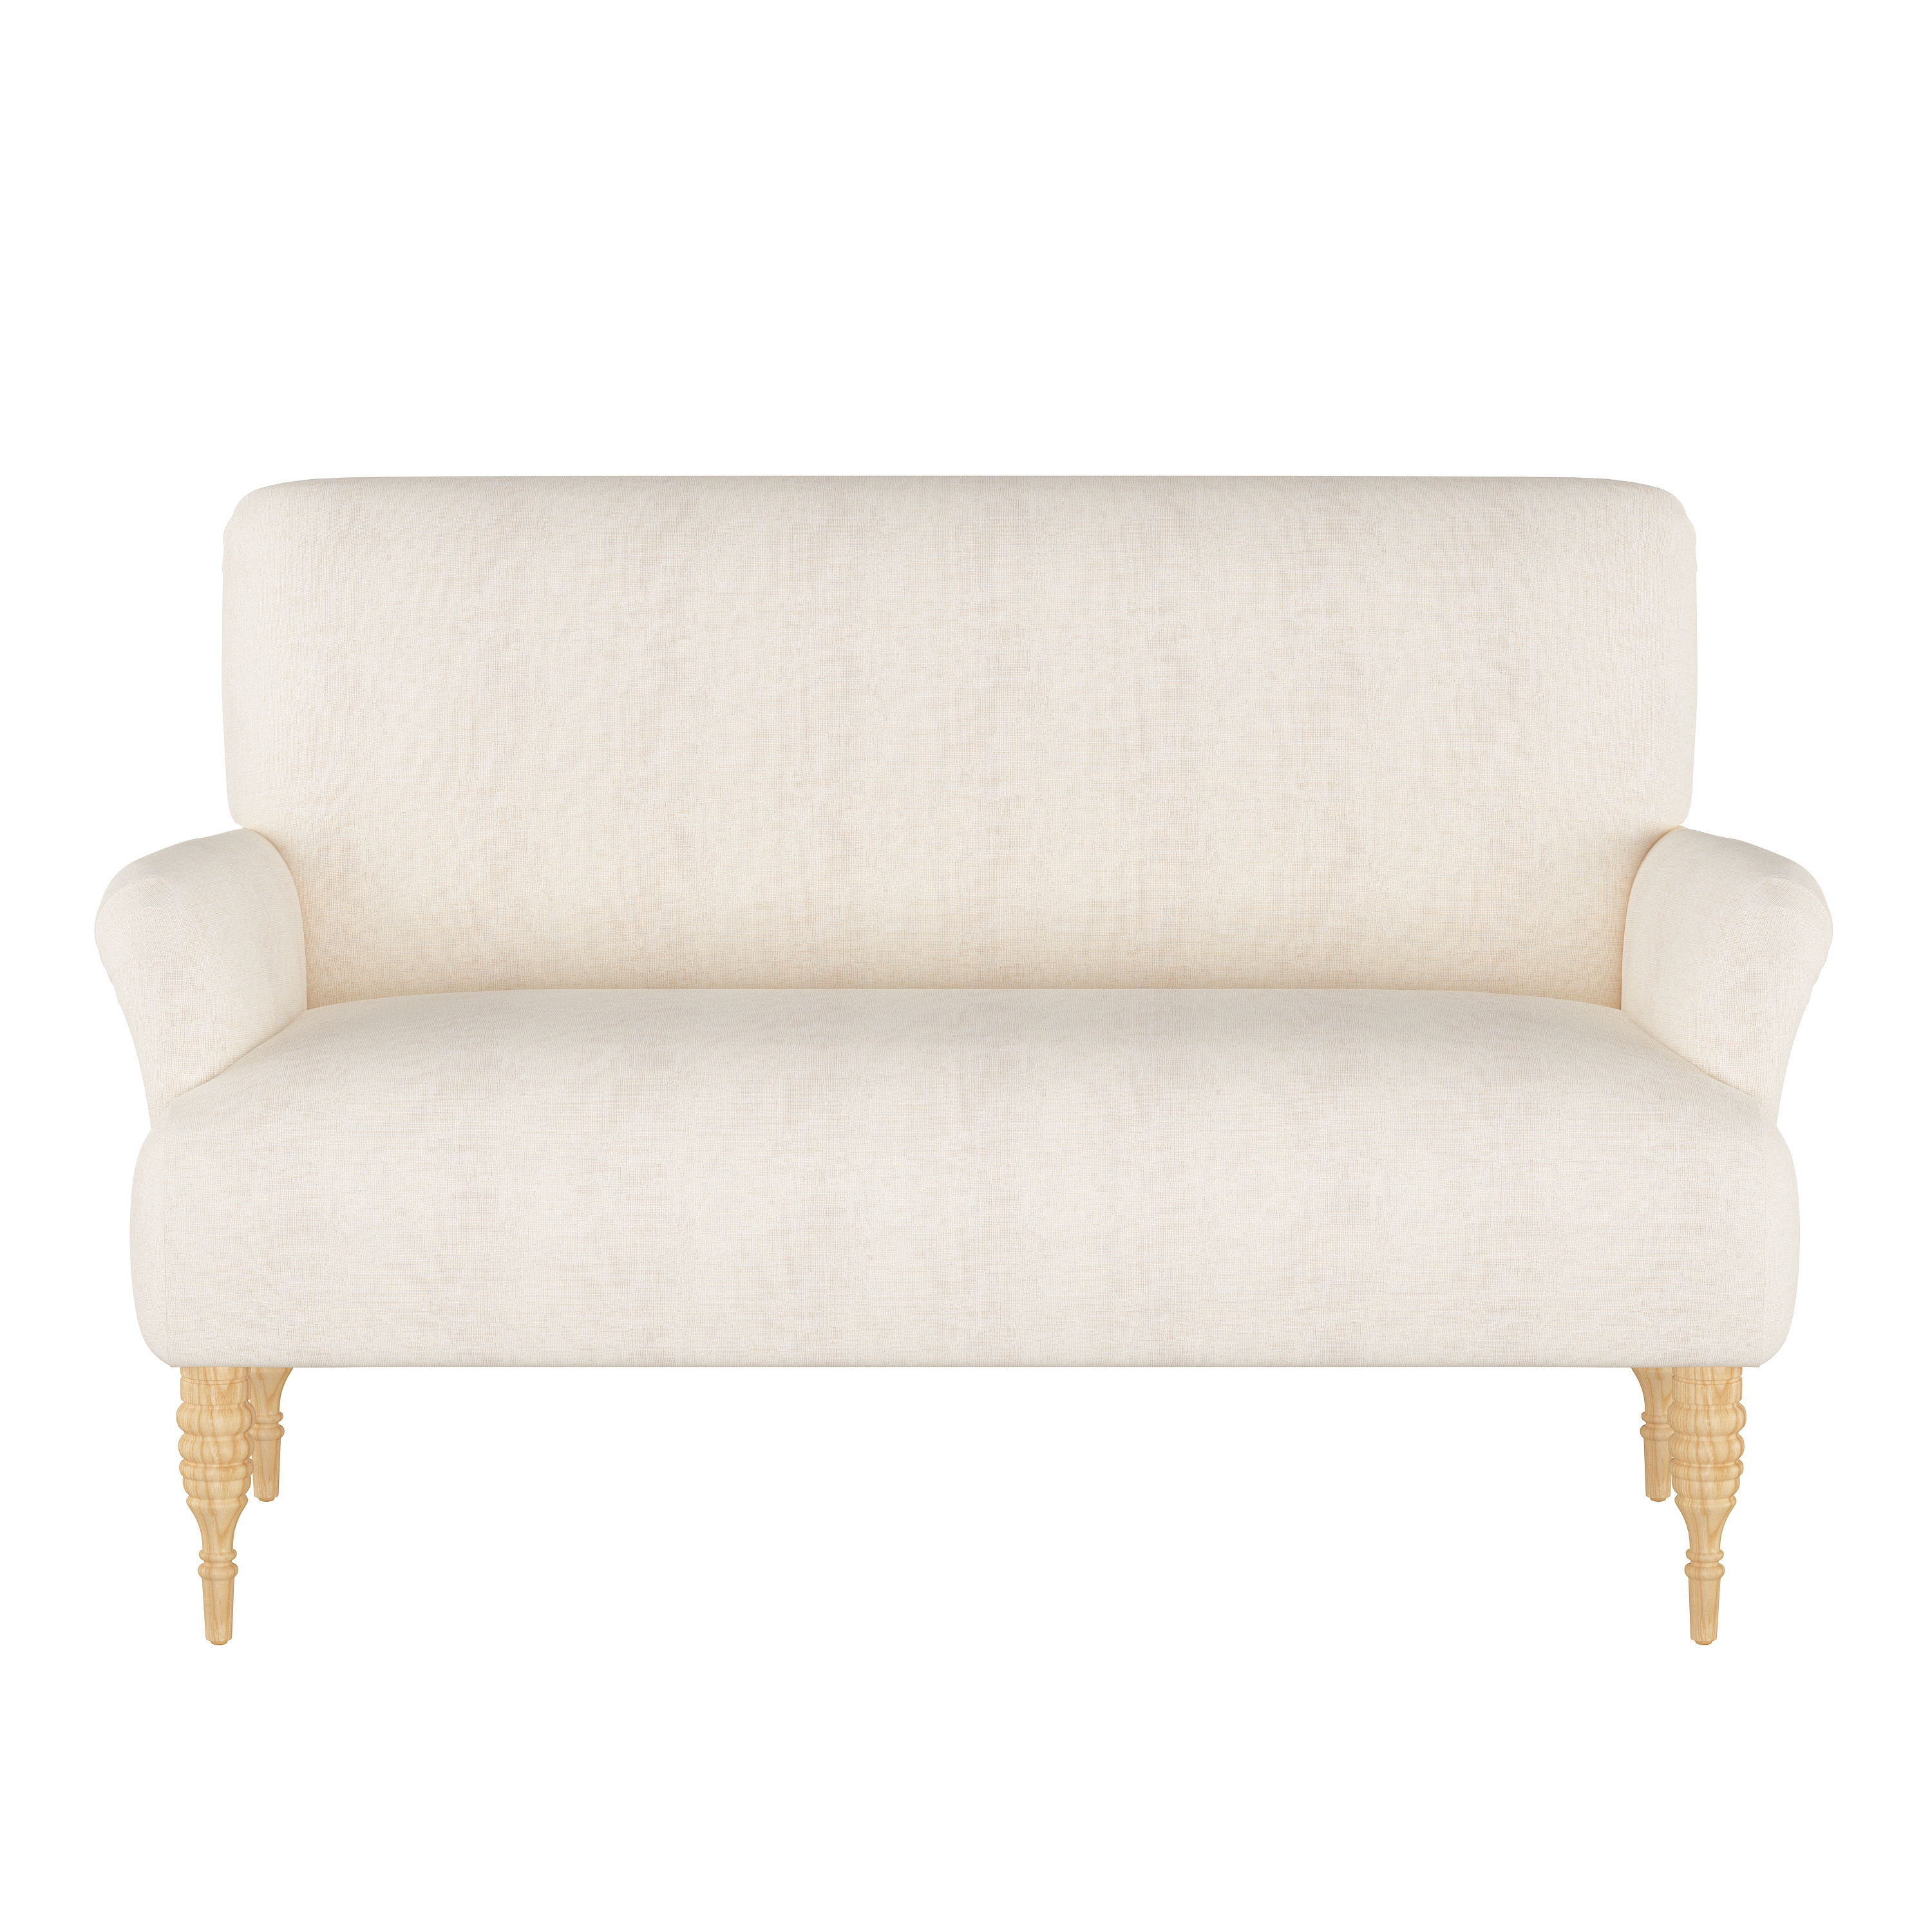 Clermont Settee, White - Image 1